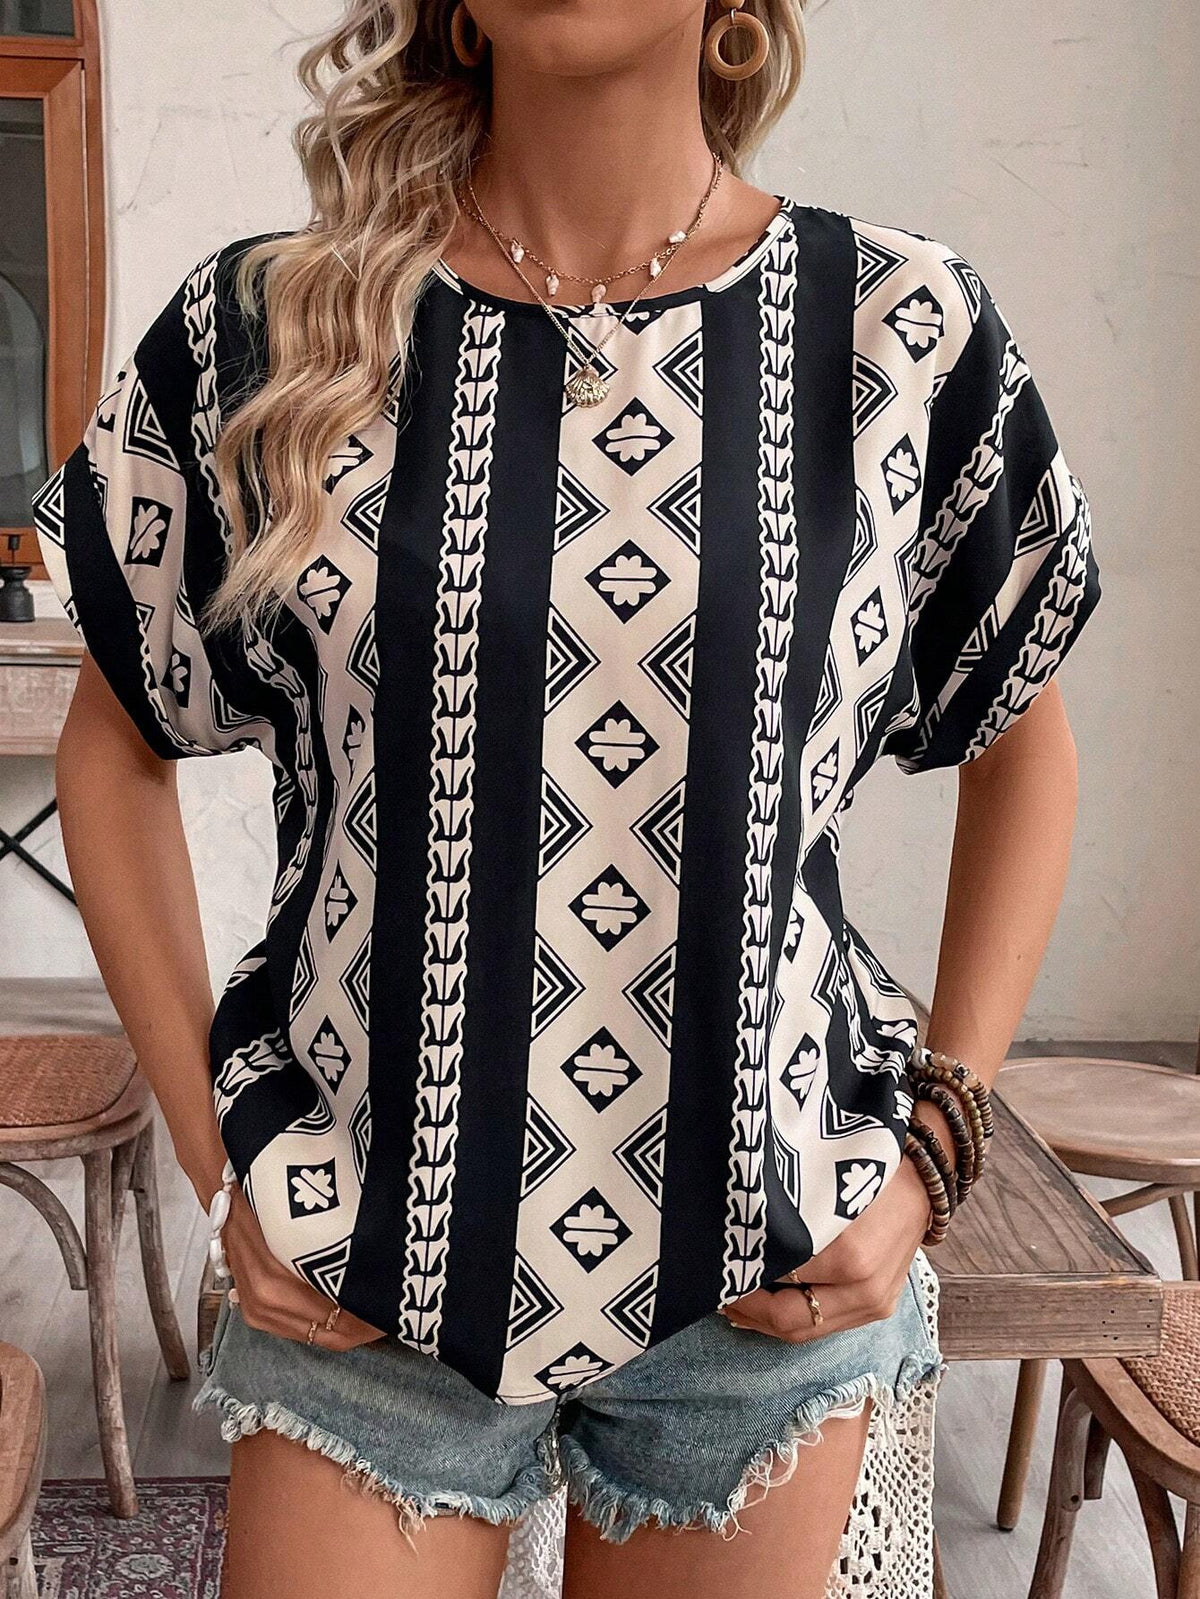 LUNE Leisure Batwing Sleeve Black And White Printed Women Blouse